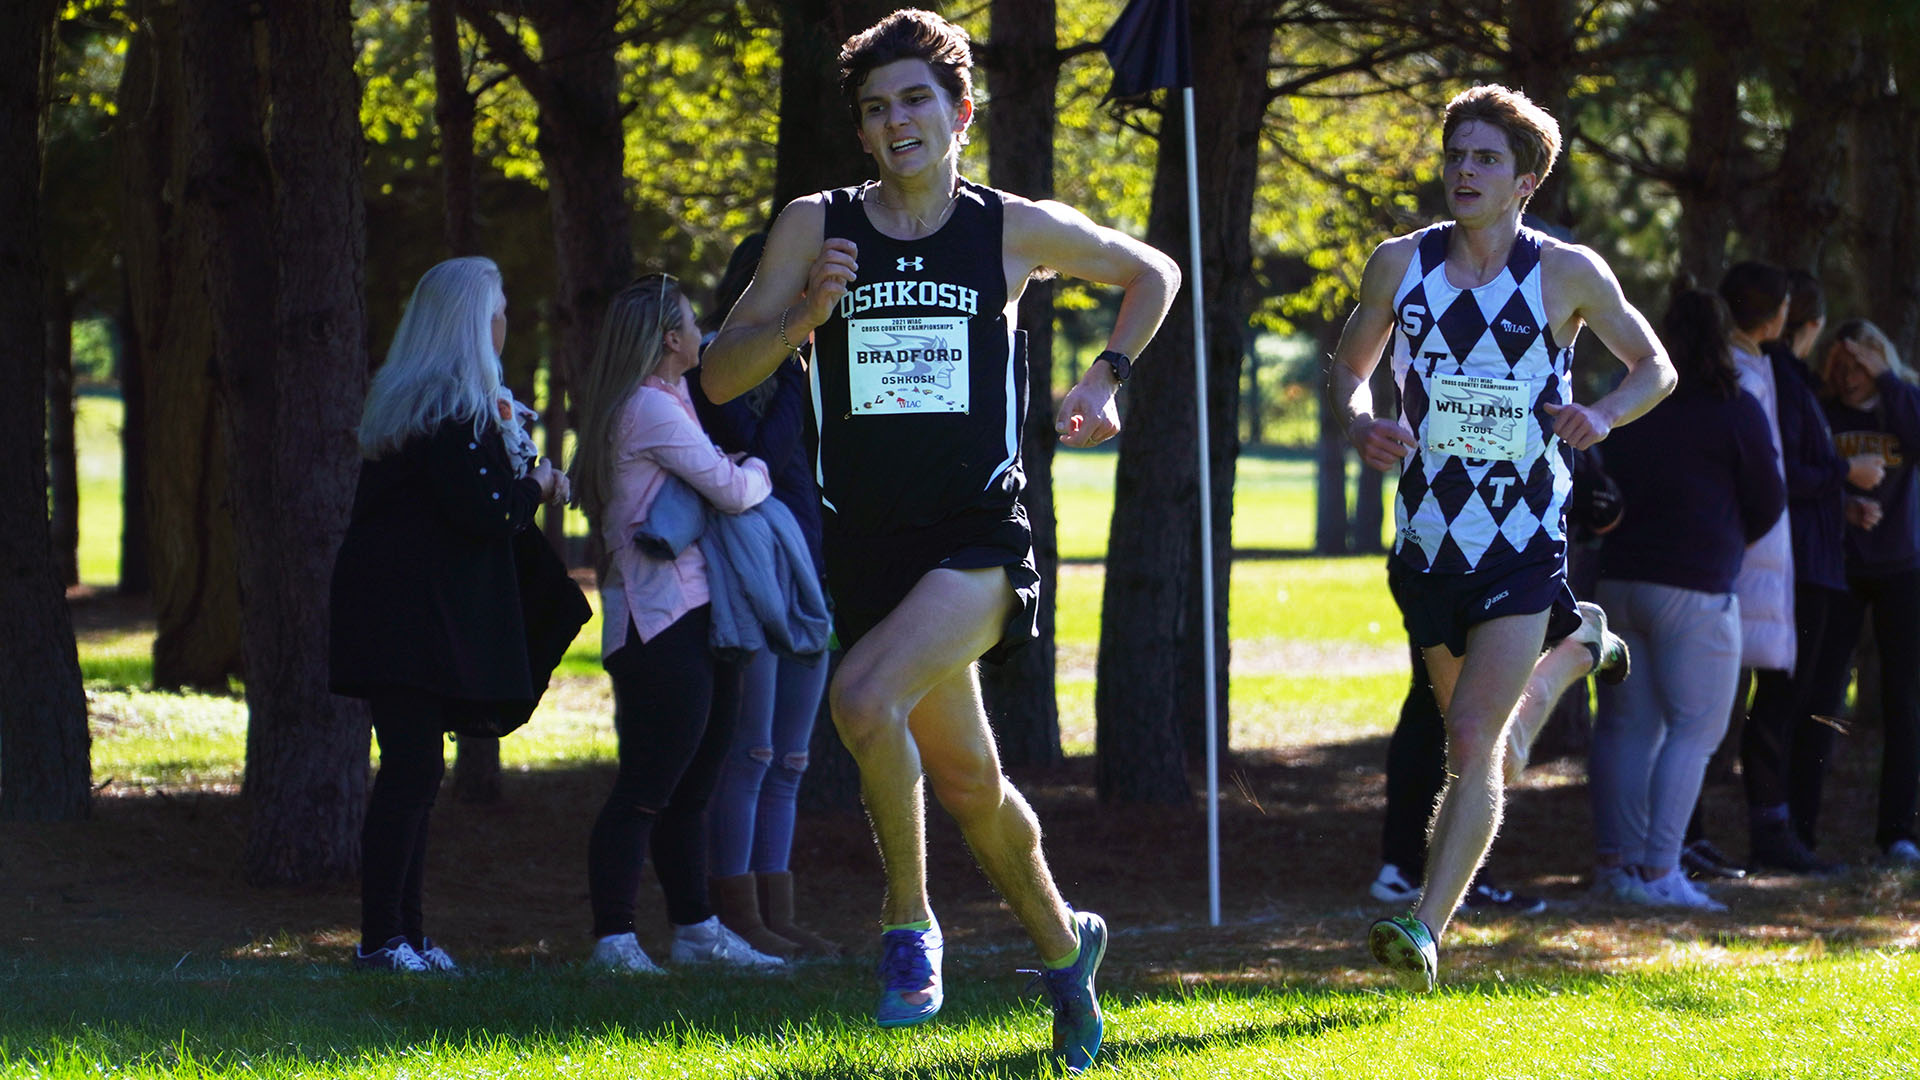 Mitchell Bradford finished 17th to lead four Titans who earned all-region status at the North Regional.